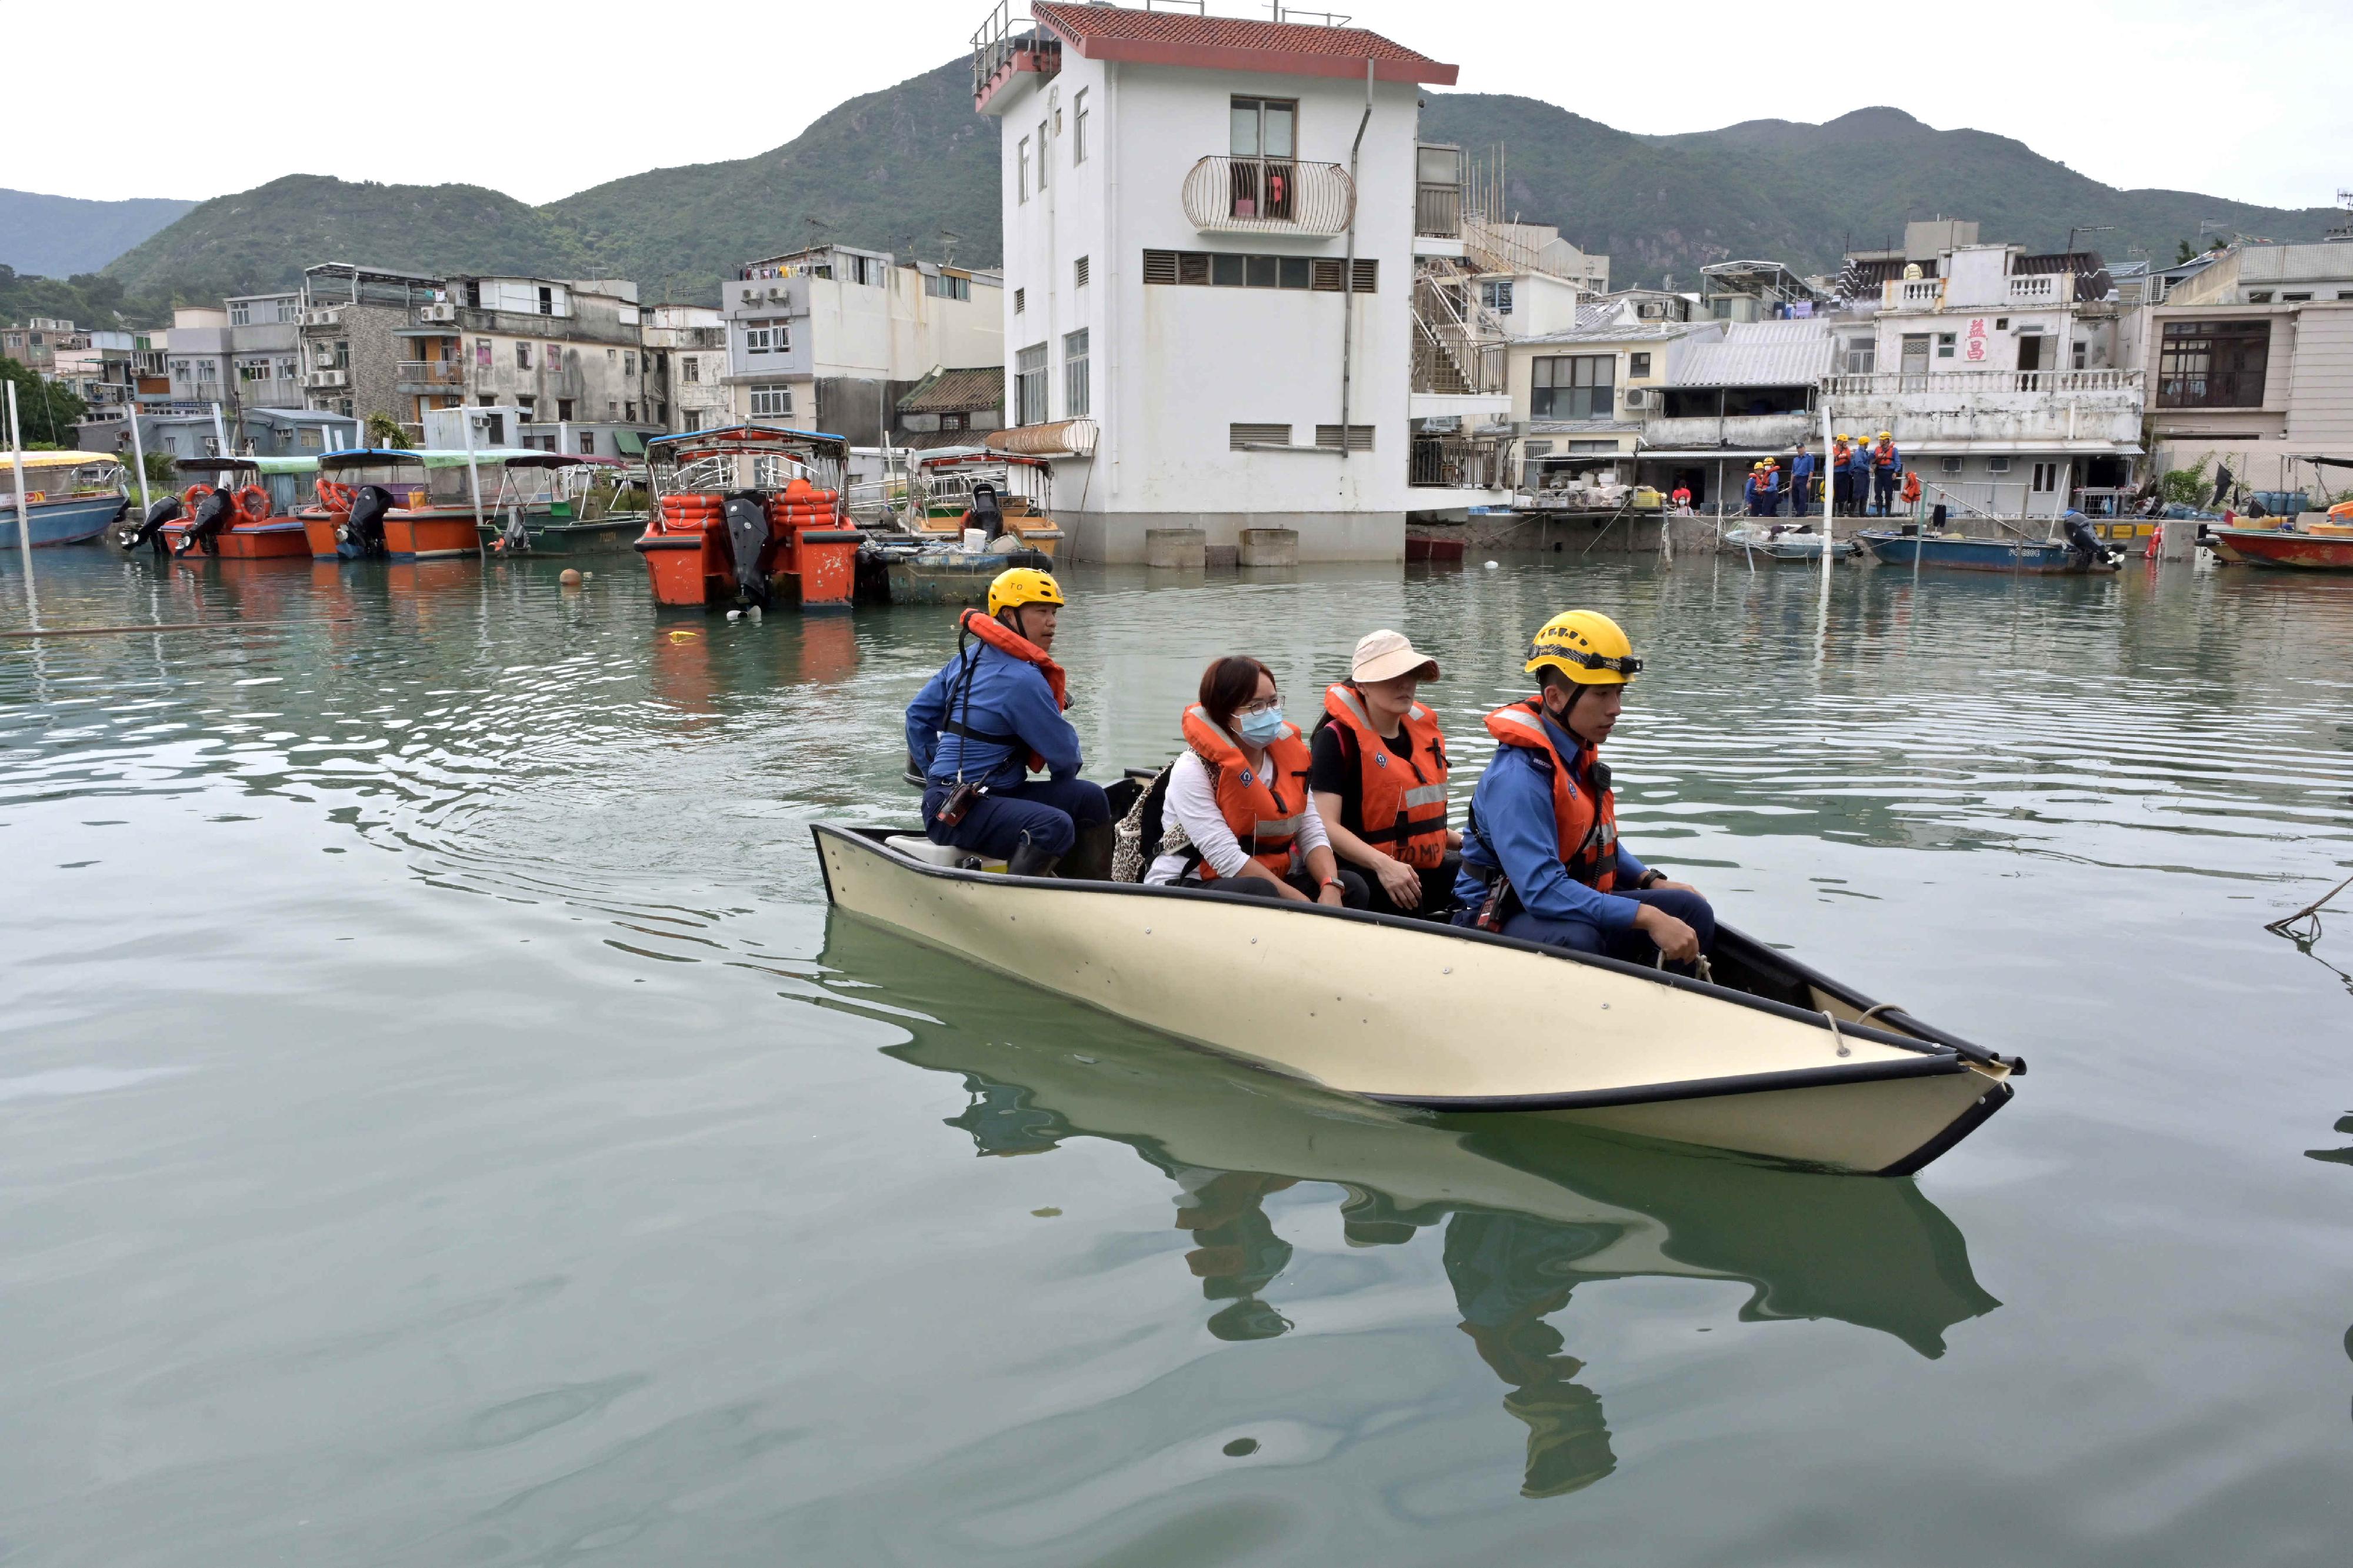 The Islands District Office conducted an inter-departmental rescue and evacuation drill in the event of flooding in Tai O today (May 10). Photo shows firemen rescuing trapped residents during the drill.